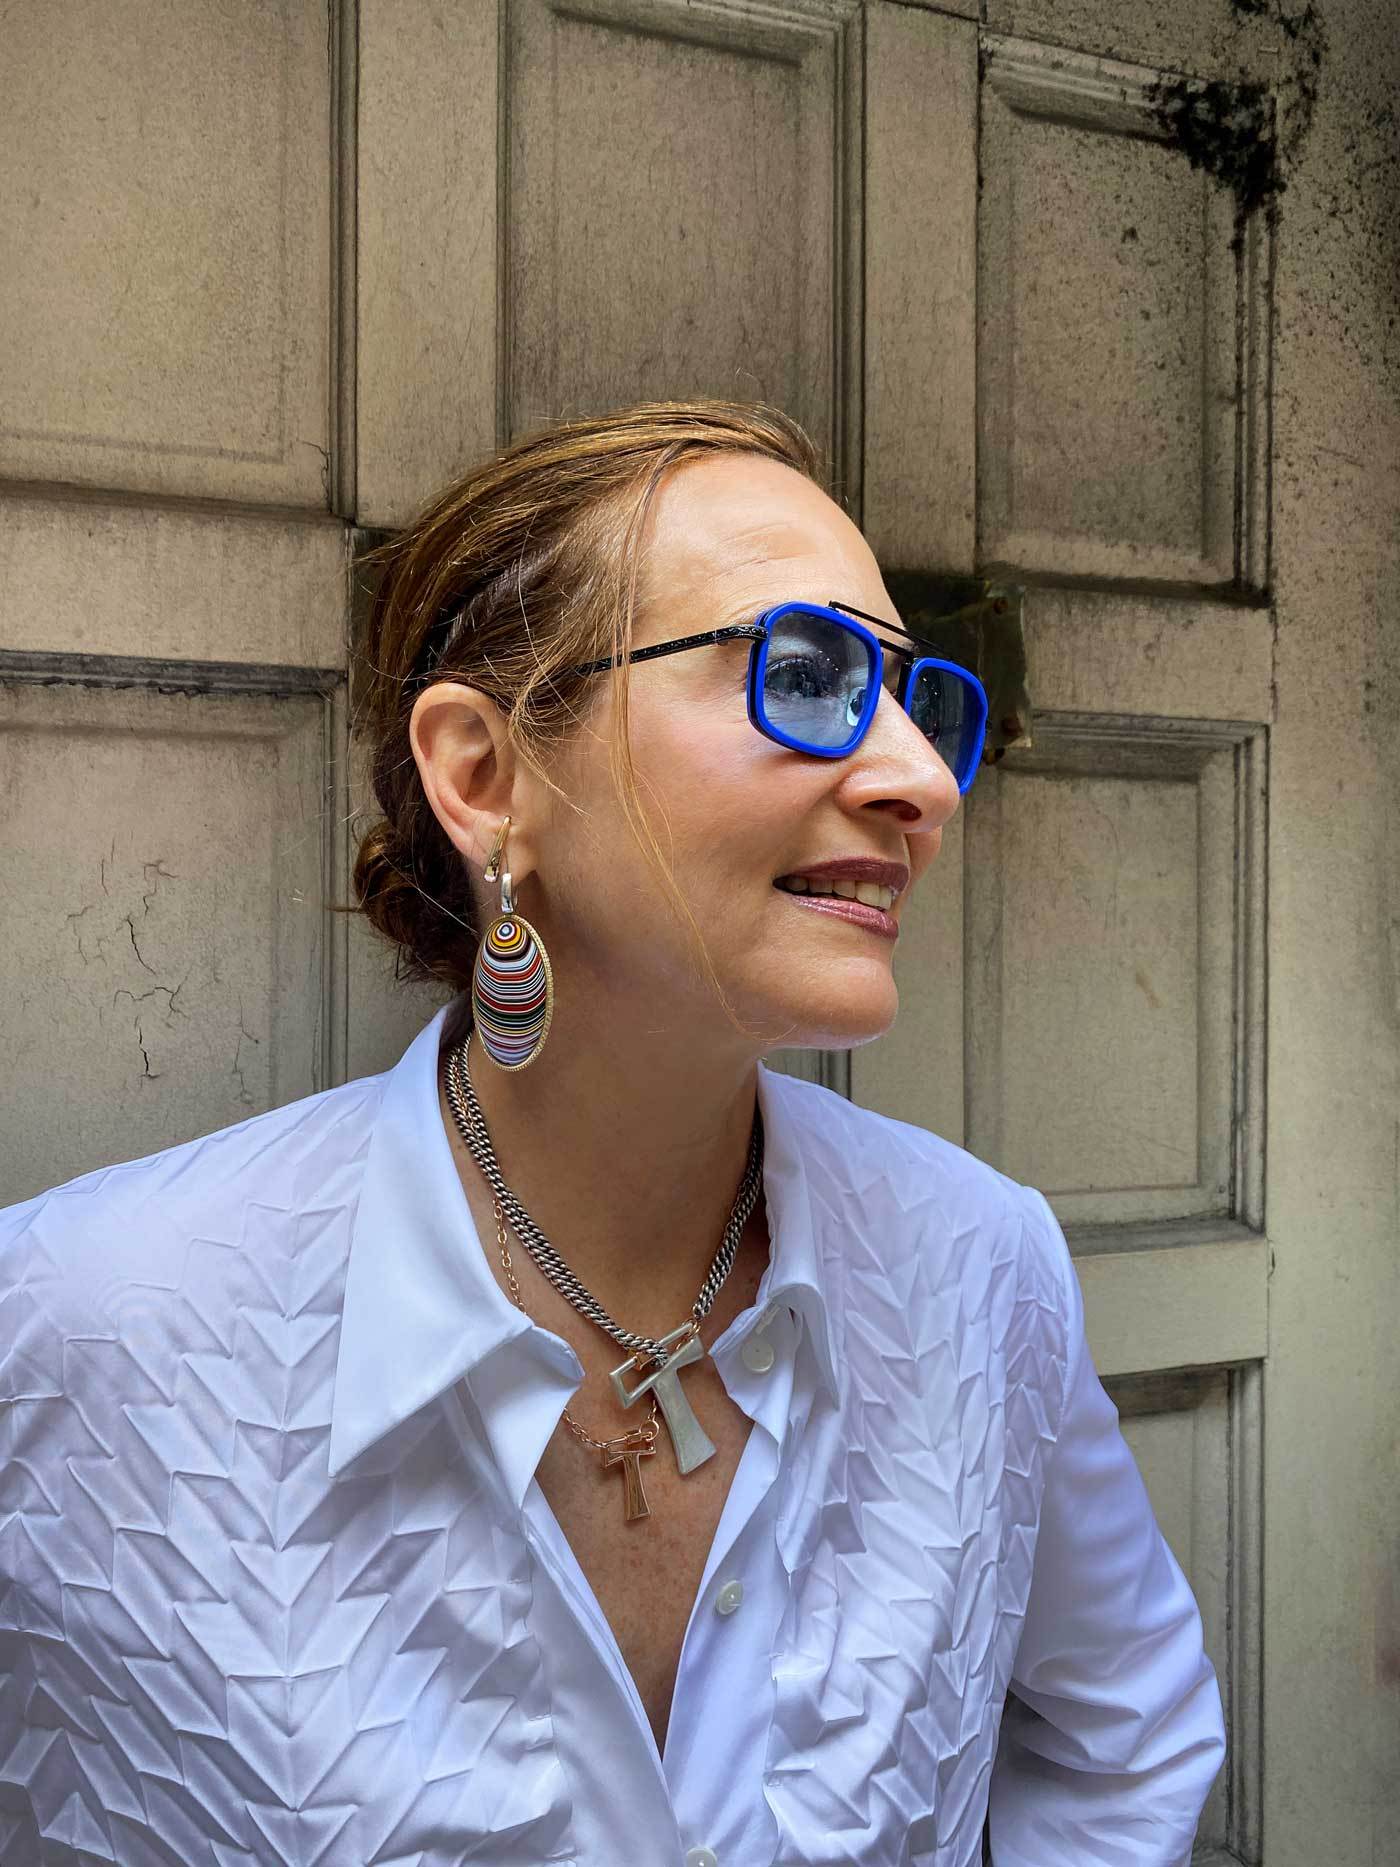 Portrait of woman wearing blue sunglasses and two necklaces with T locks